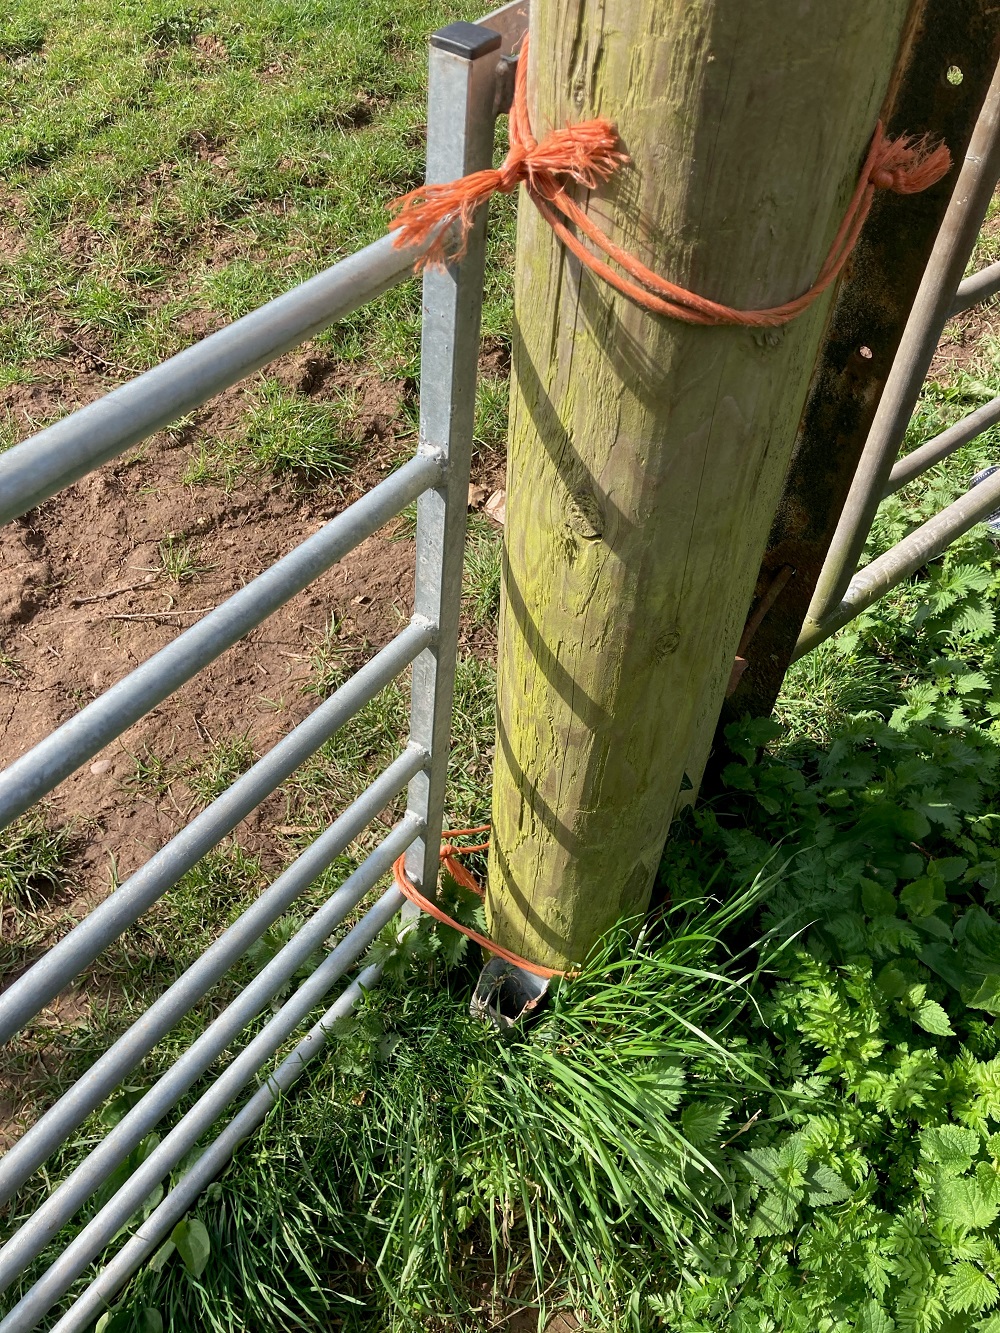 Footpath gate held together with string for more than two years